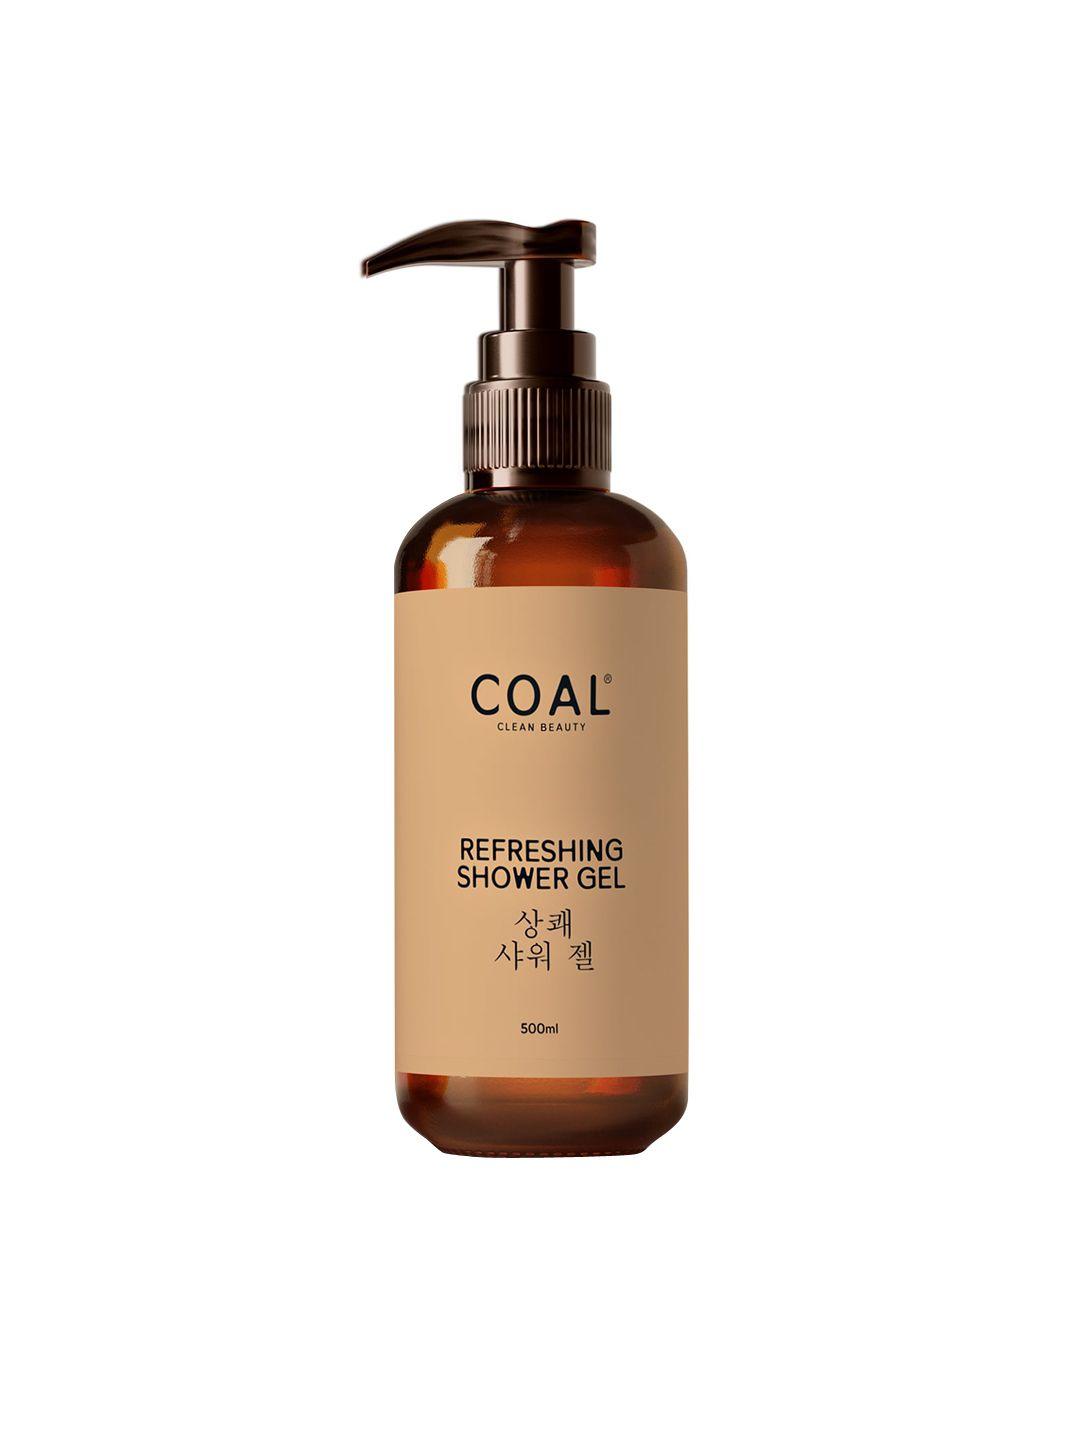 coal clean beauty refreshing shower gel with aloe vera & cocamidopropyl betaine - 500 ml